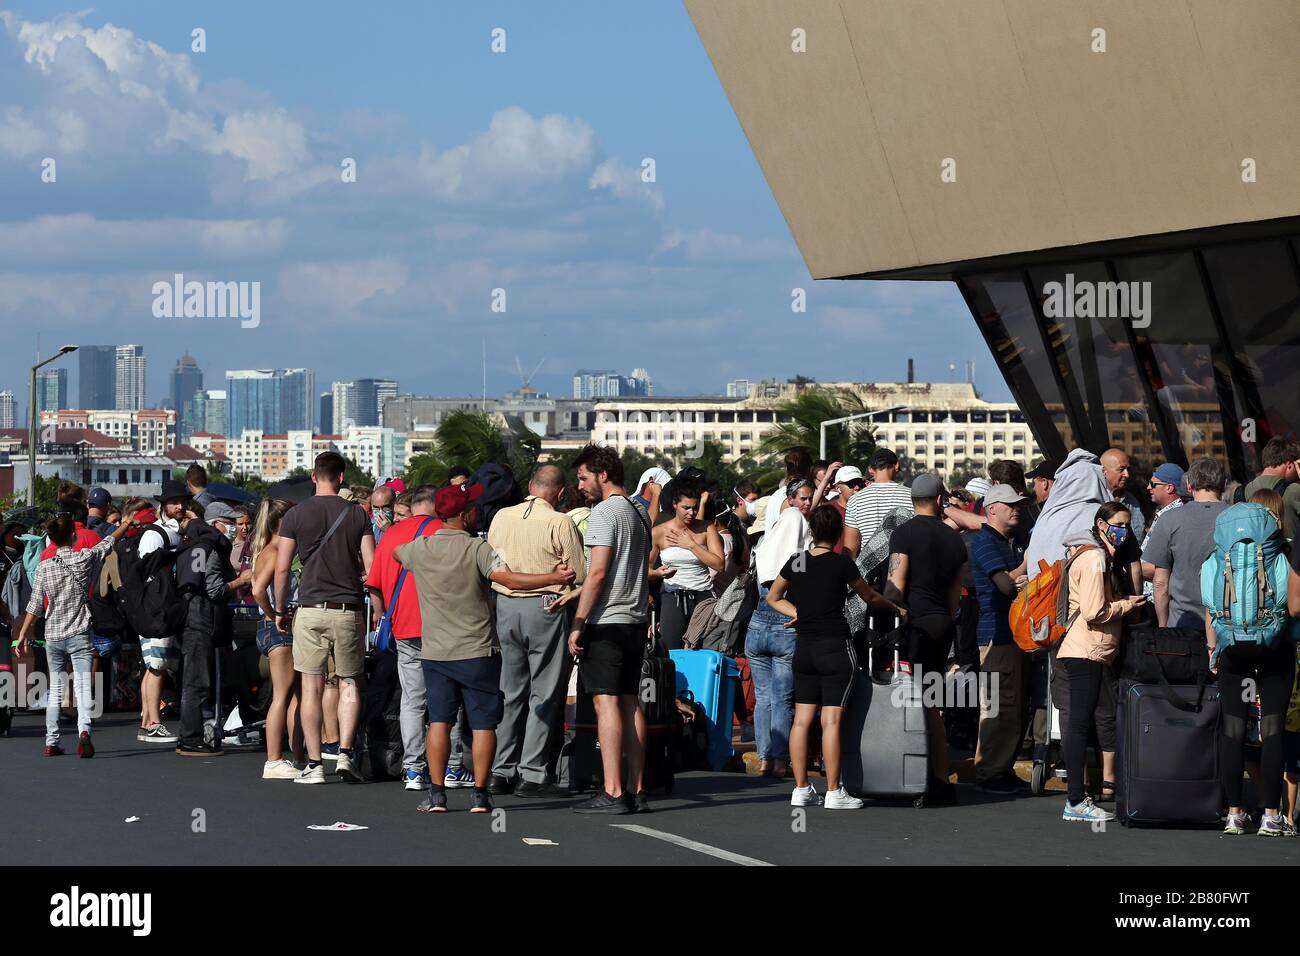 Manila, Philippines. 19th Mar, 2020. There are tourists at the airport. More than 300 Germans are waiting at Ninoy Aquino International Airport for a Lufthansa flight chartered by the German Embassy in the Philippines because of the Covid 19 pandemic. Credit: Alejandro Ernesto//Alejandro Ernesto/DPA/Alamy Live News Stock Photo